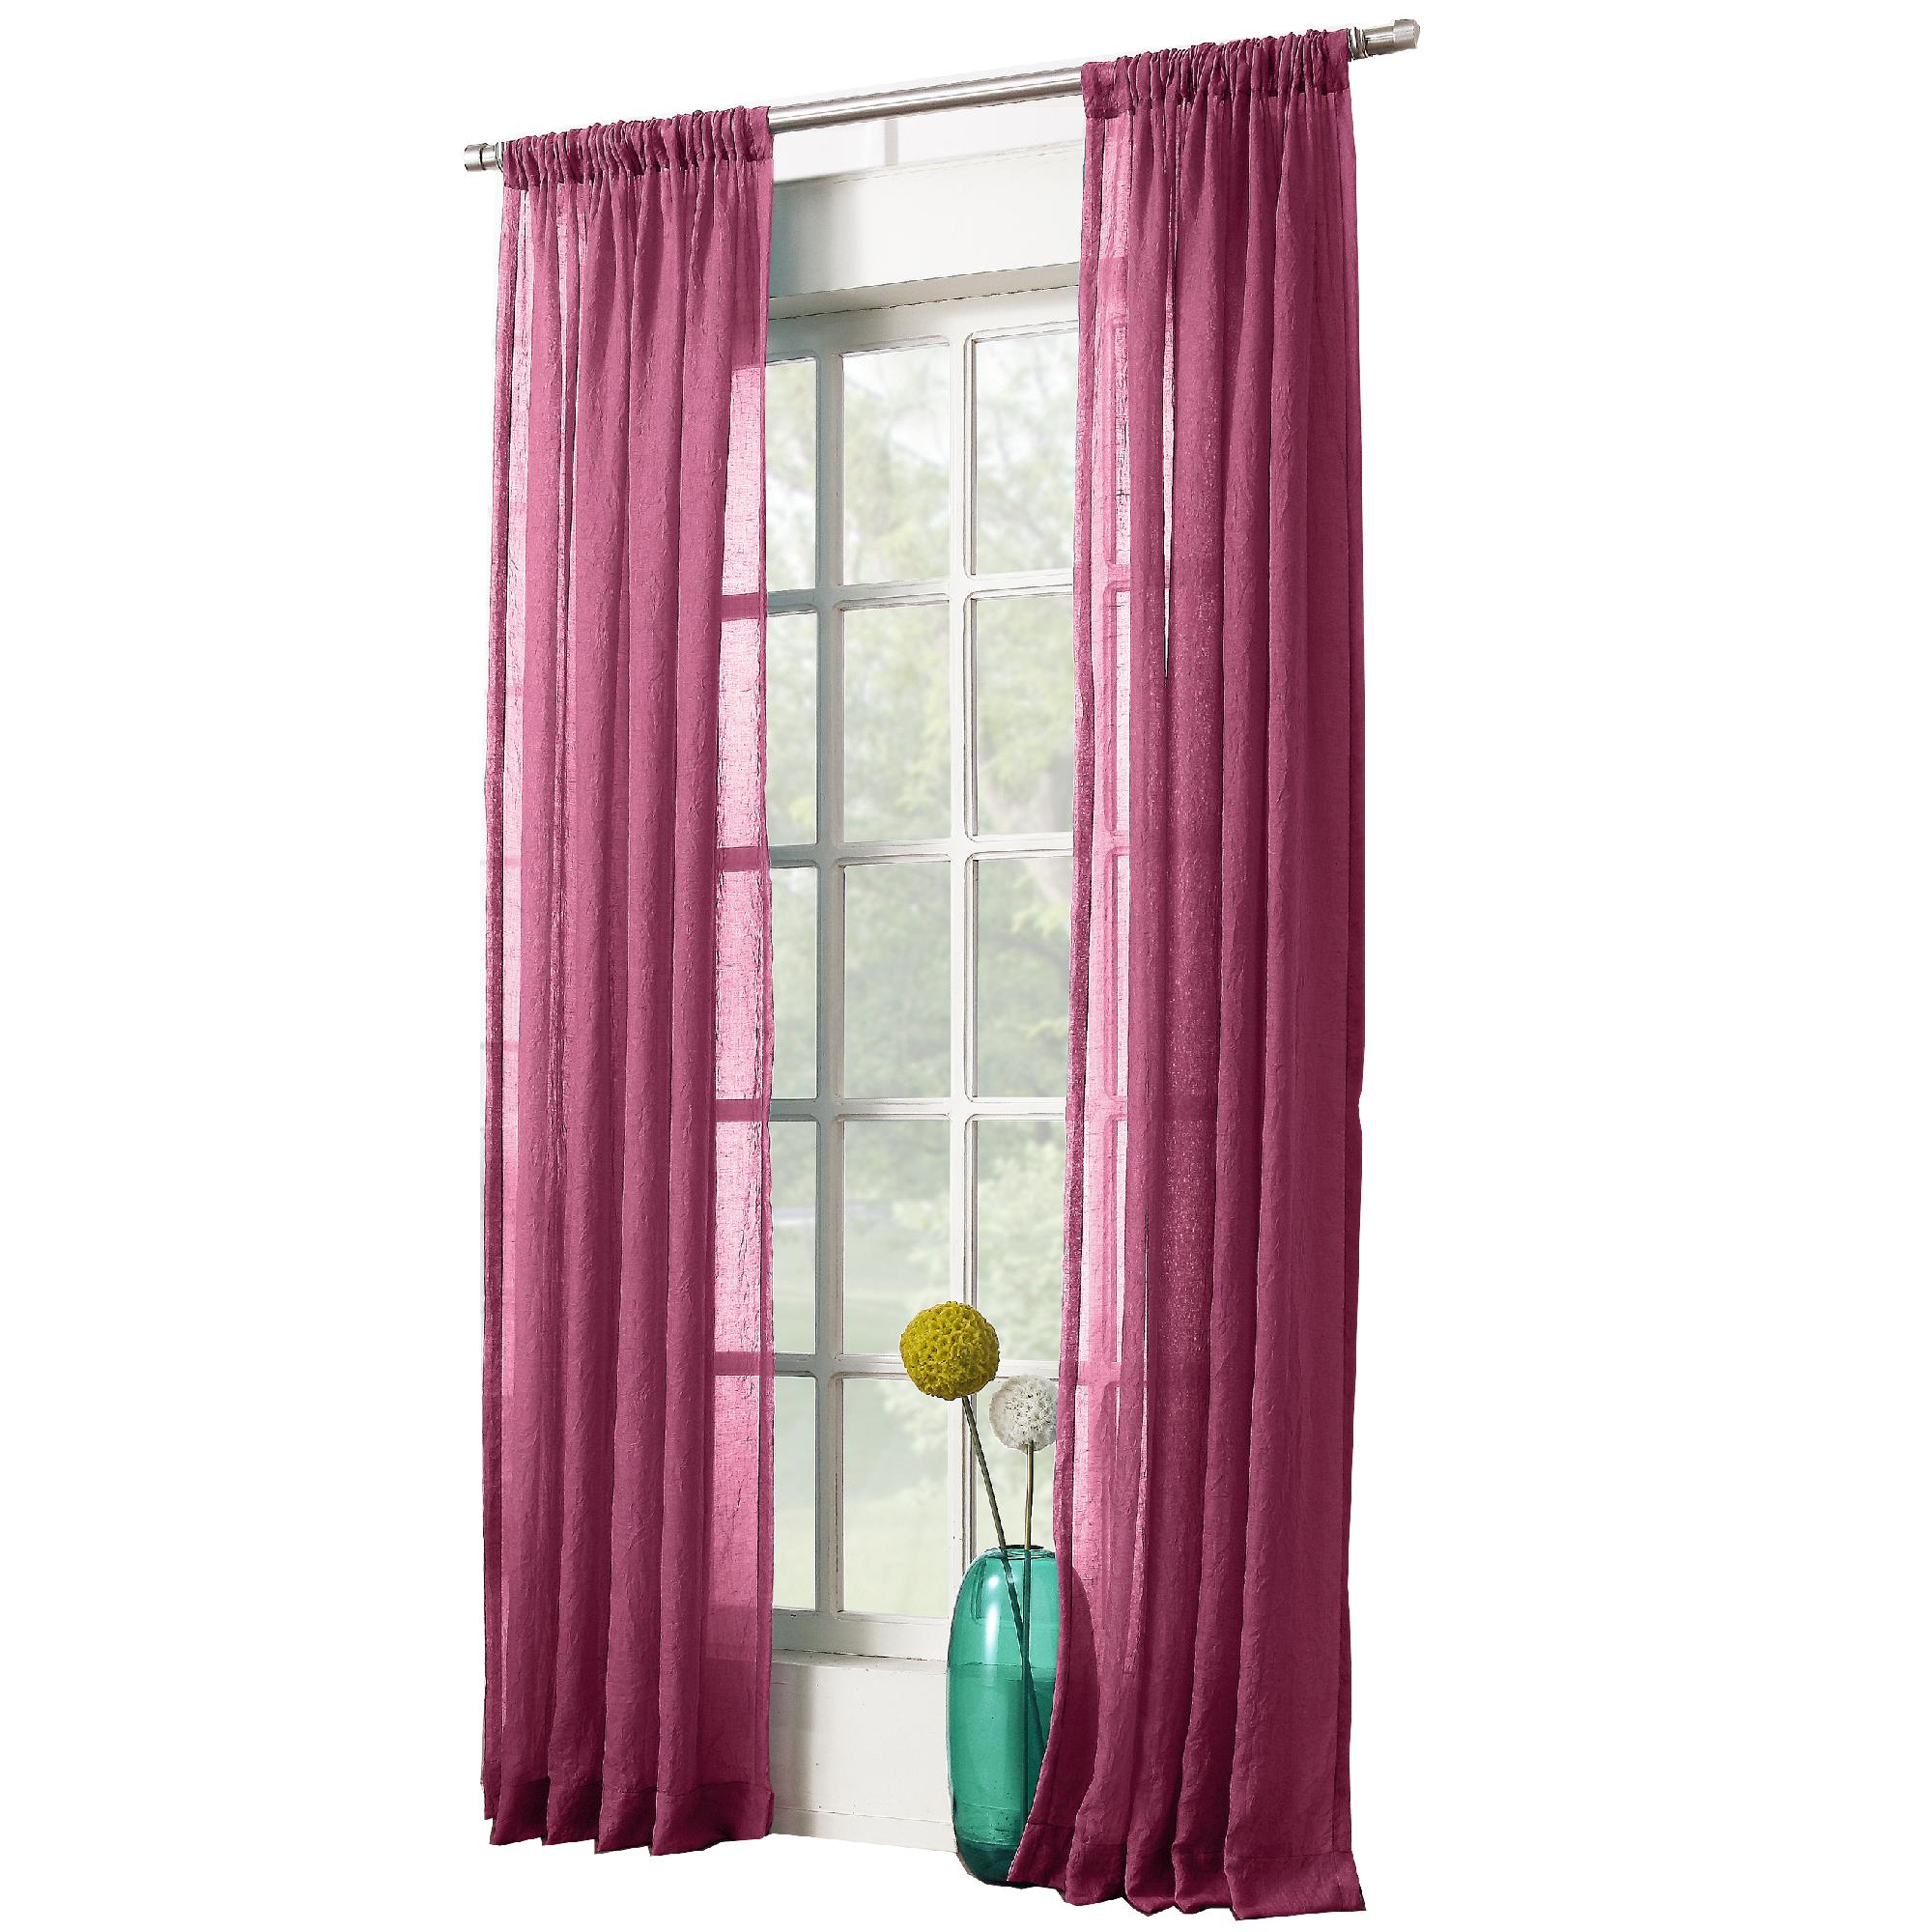 Laos Relaxed Crushed Sheer Curtain 50x63